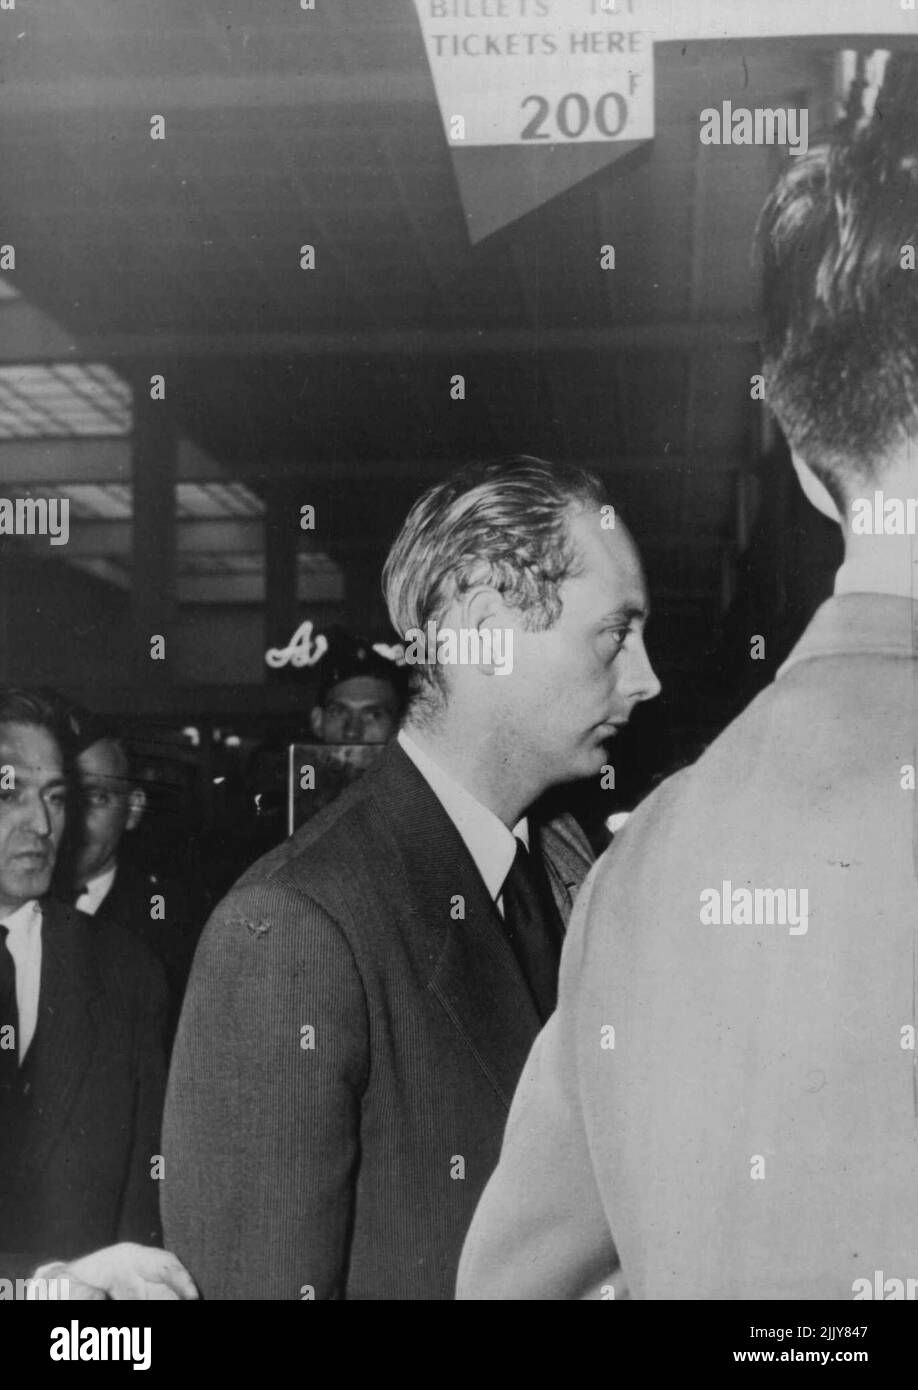 Peer Wanted For 'Serious Charges' -- Lord Montague of Beaulieu on his arrival at Orlt Airport. Lord Montague of Beaulieu, who is wanted by the British police for 'serious charges', arrived in Paris yesterday from New York. October 22, 1953. (Photo by Paul Popper). Stock Photo